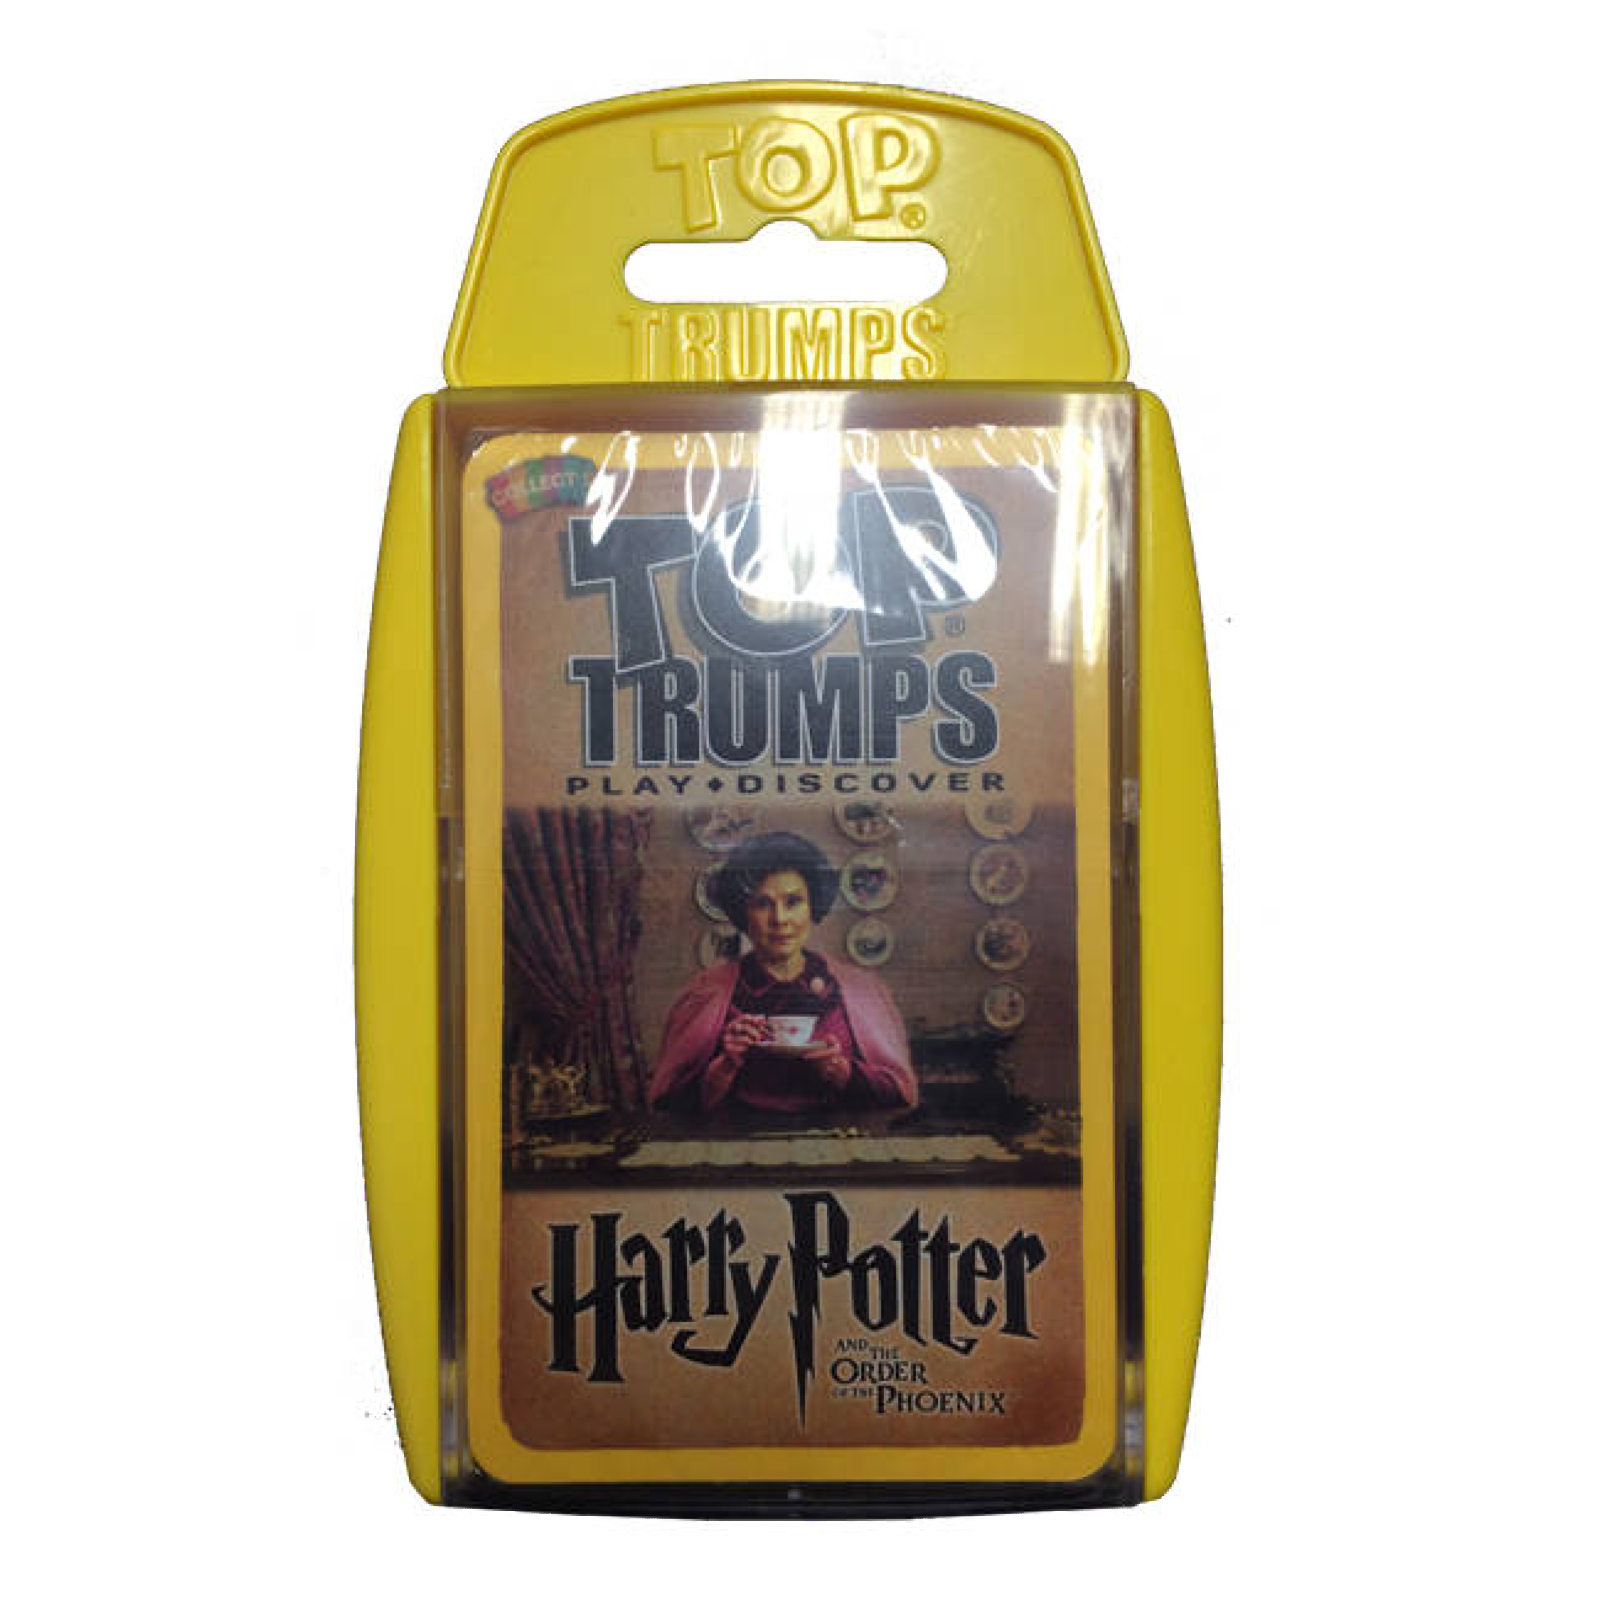 Top Trumps - Harry Potter & The Order of the Phoenix